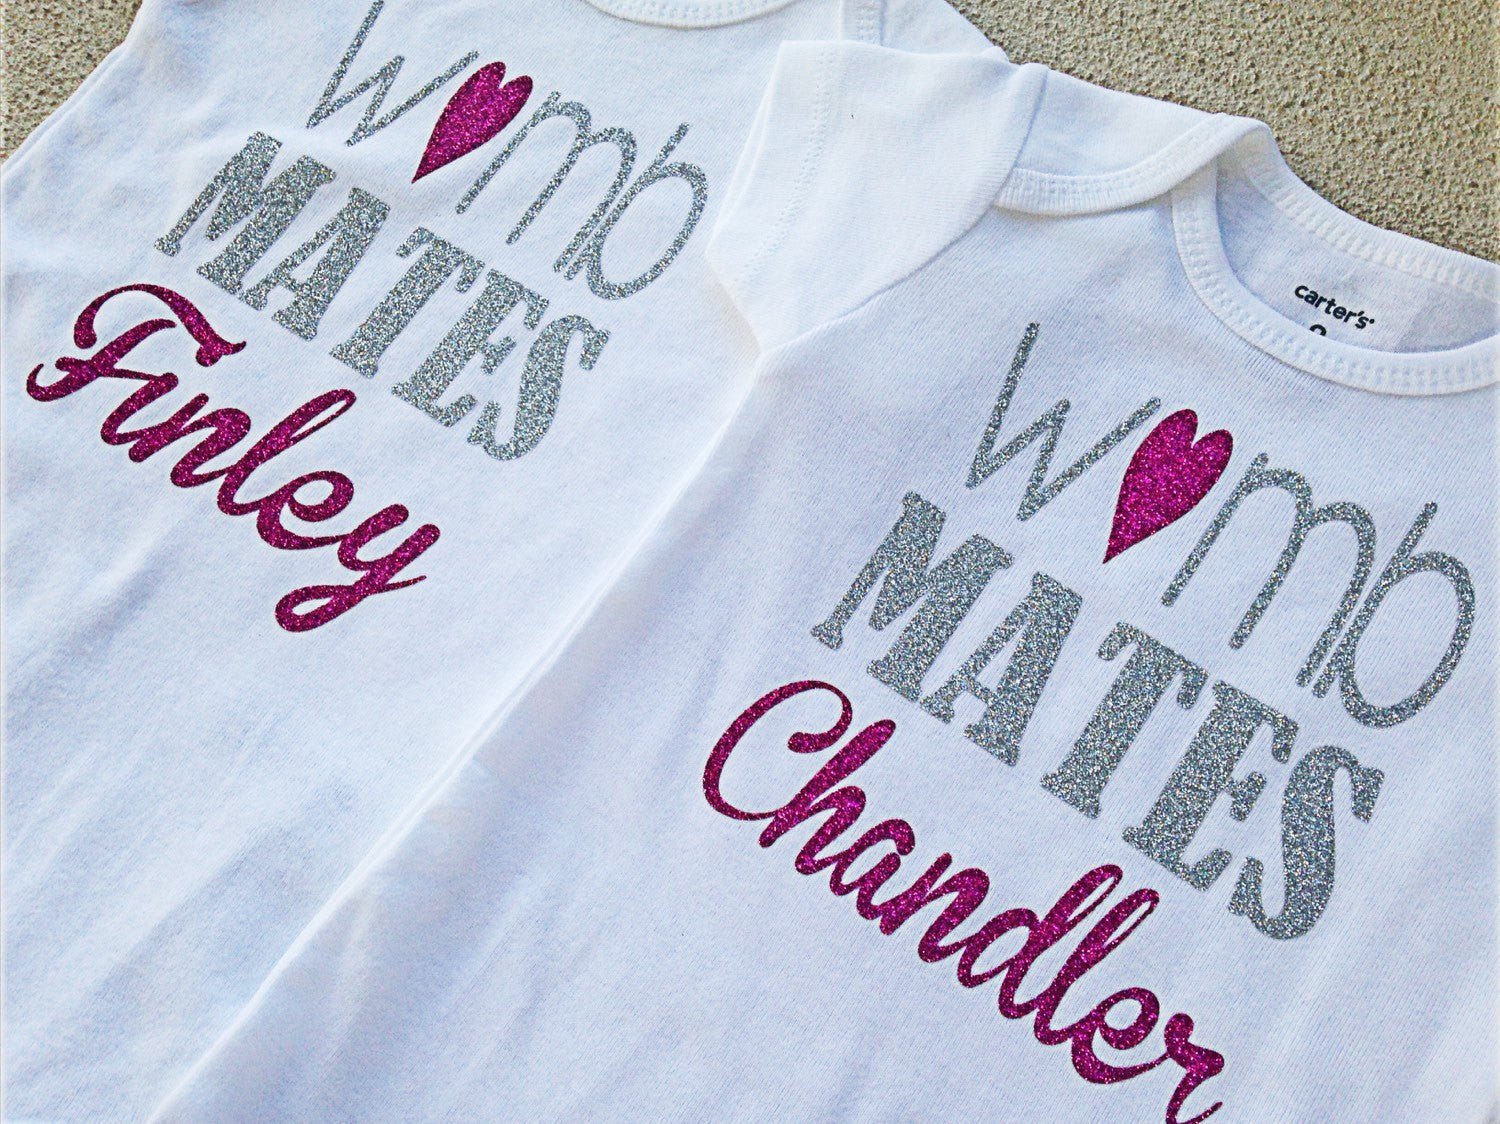 Personalized Twin Womb Mates Outfits - Squishy Cheeks